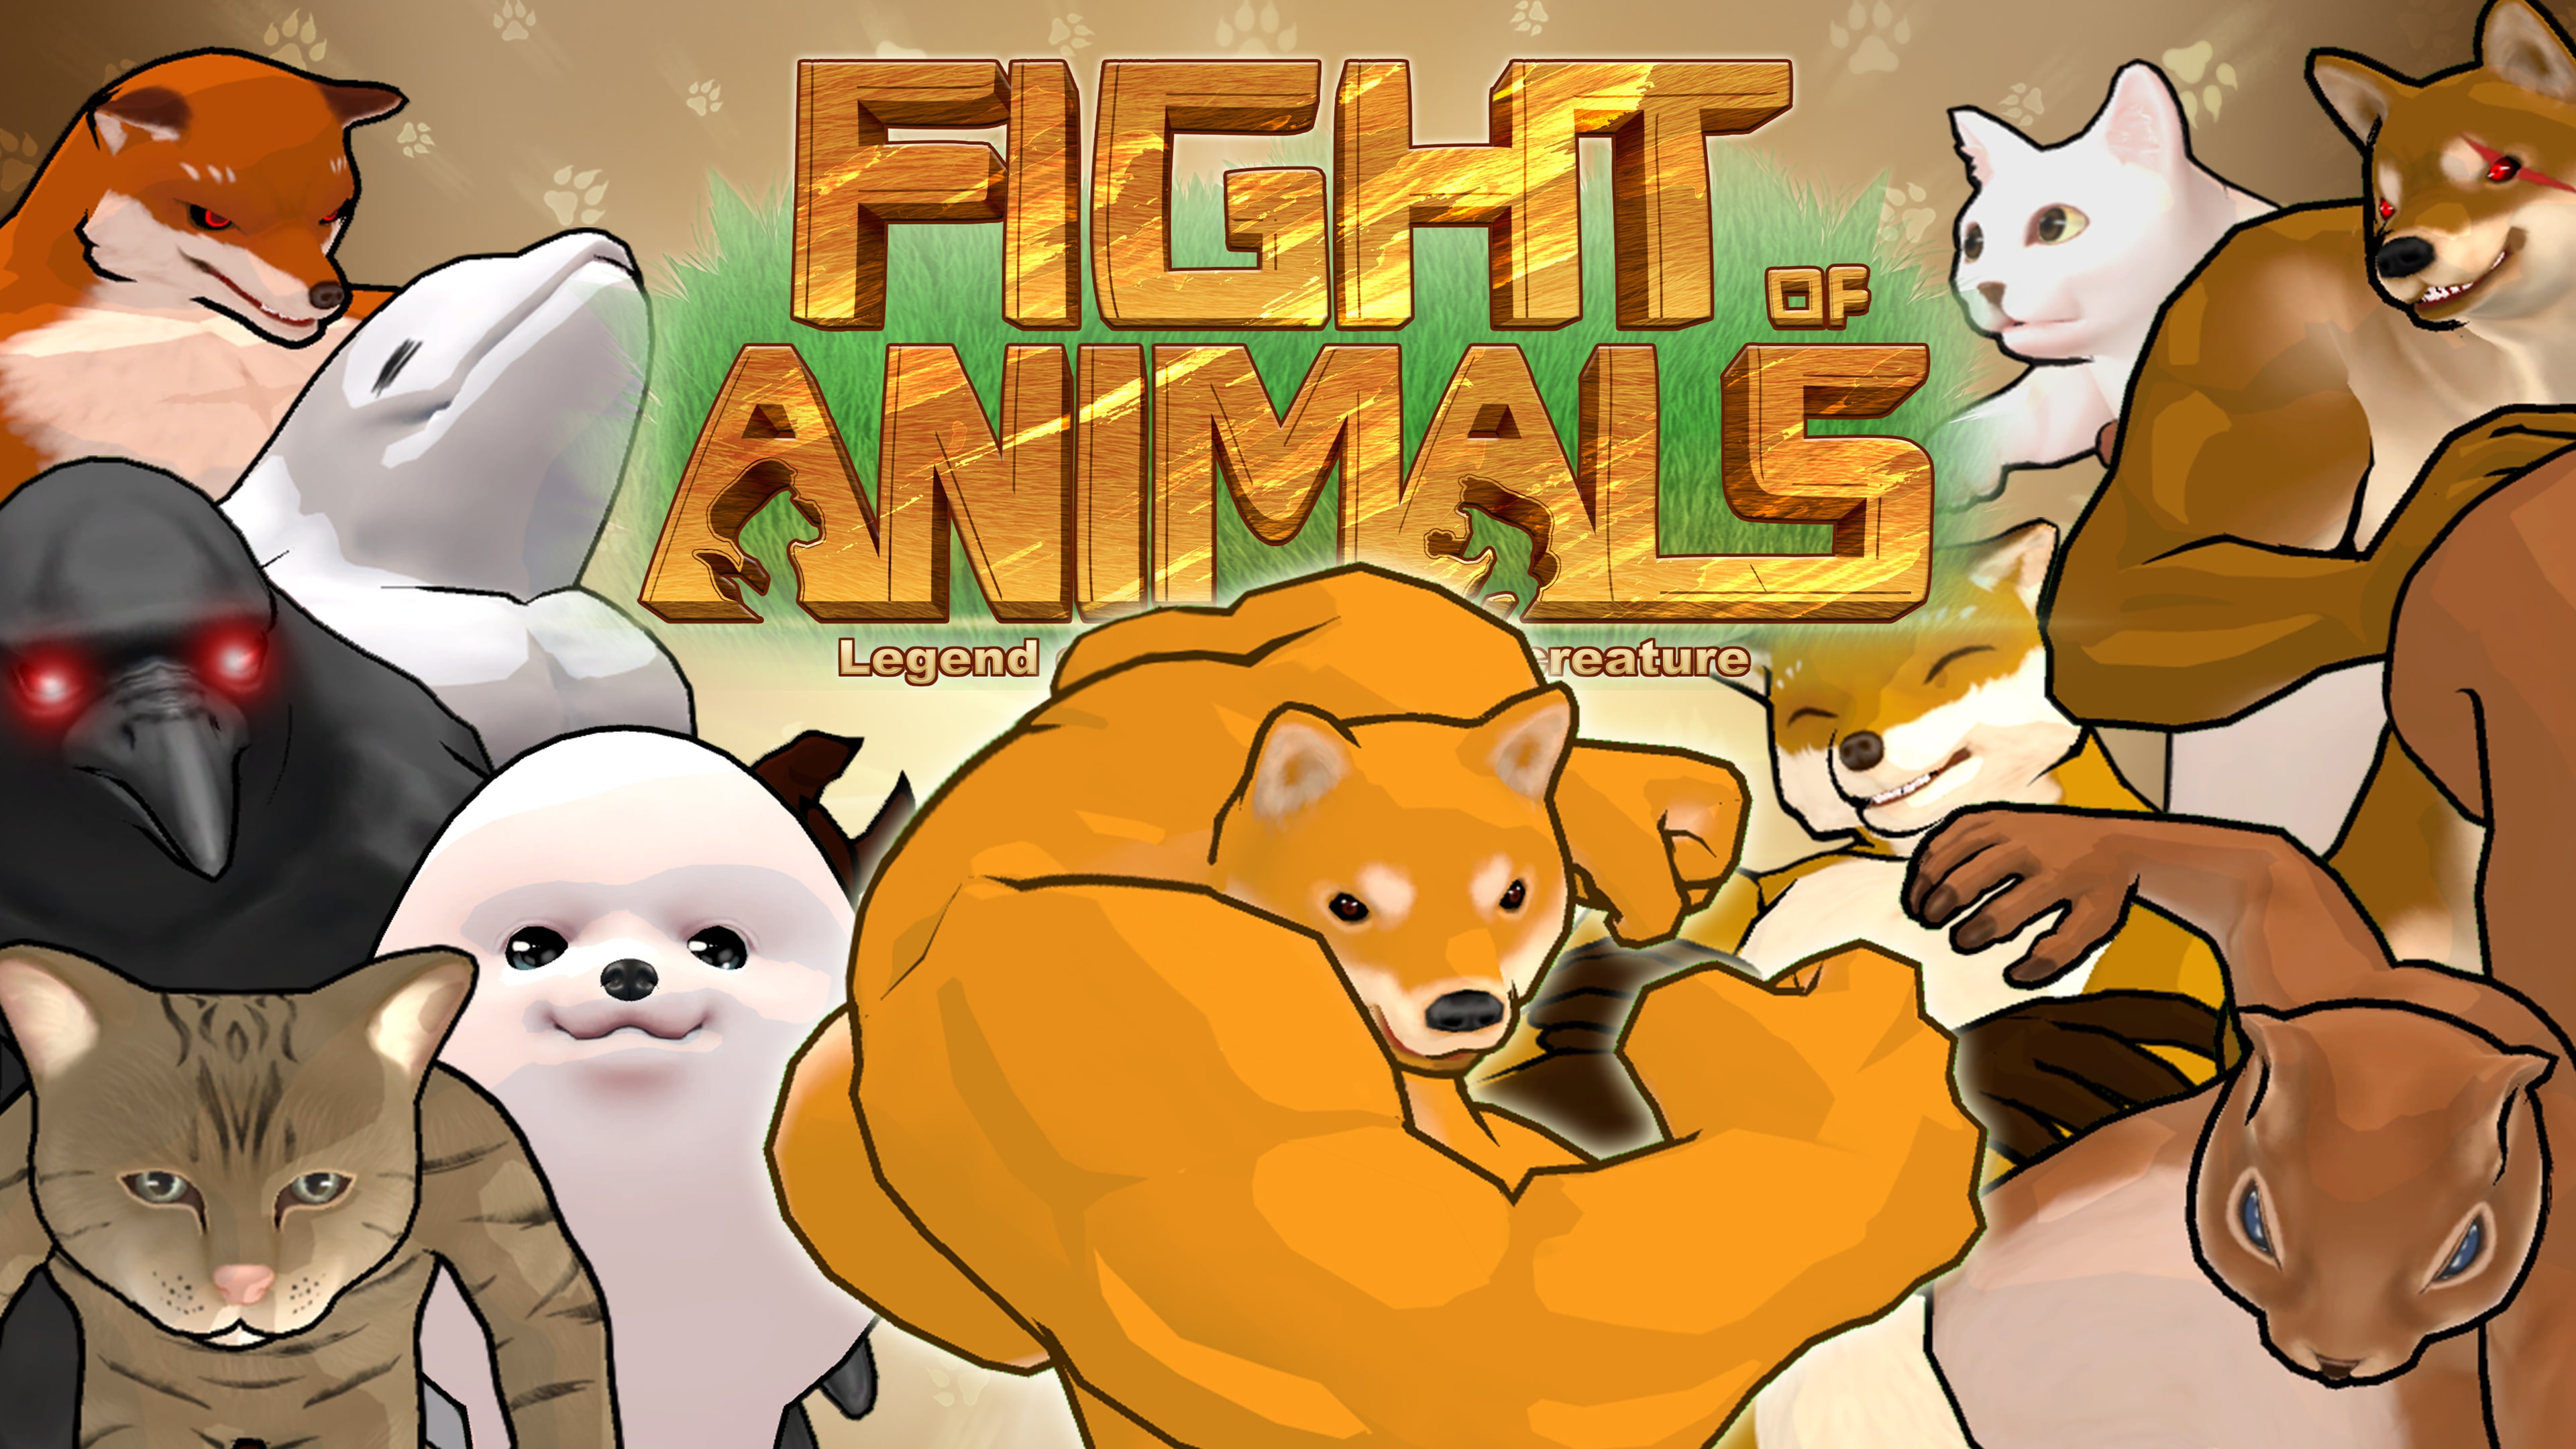 Fight of Animals (Simplified Chinese, English, Japanese, Traditional Chinese)